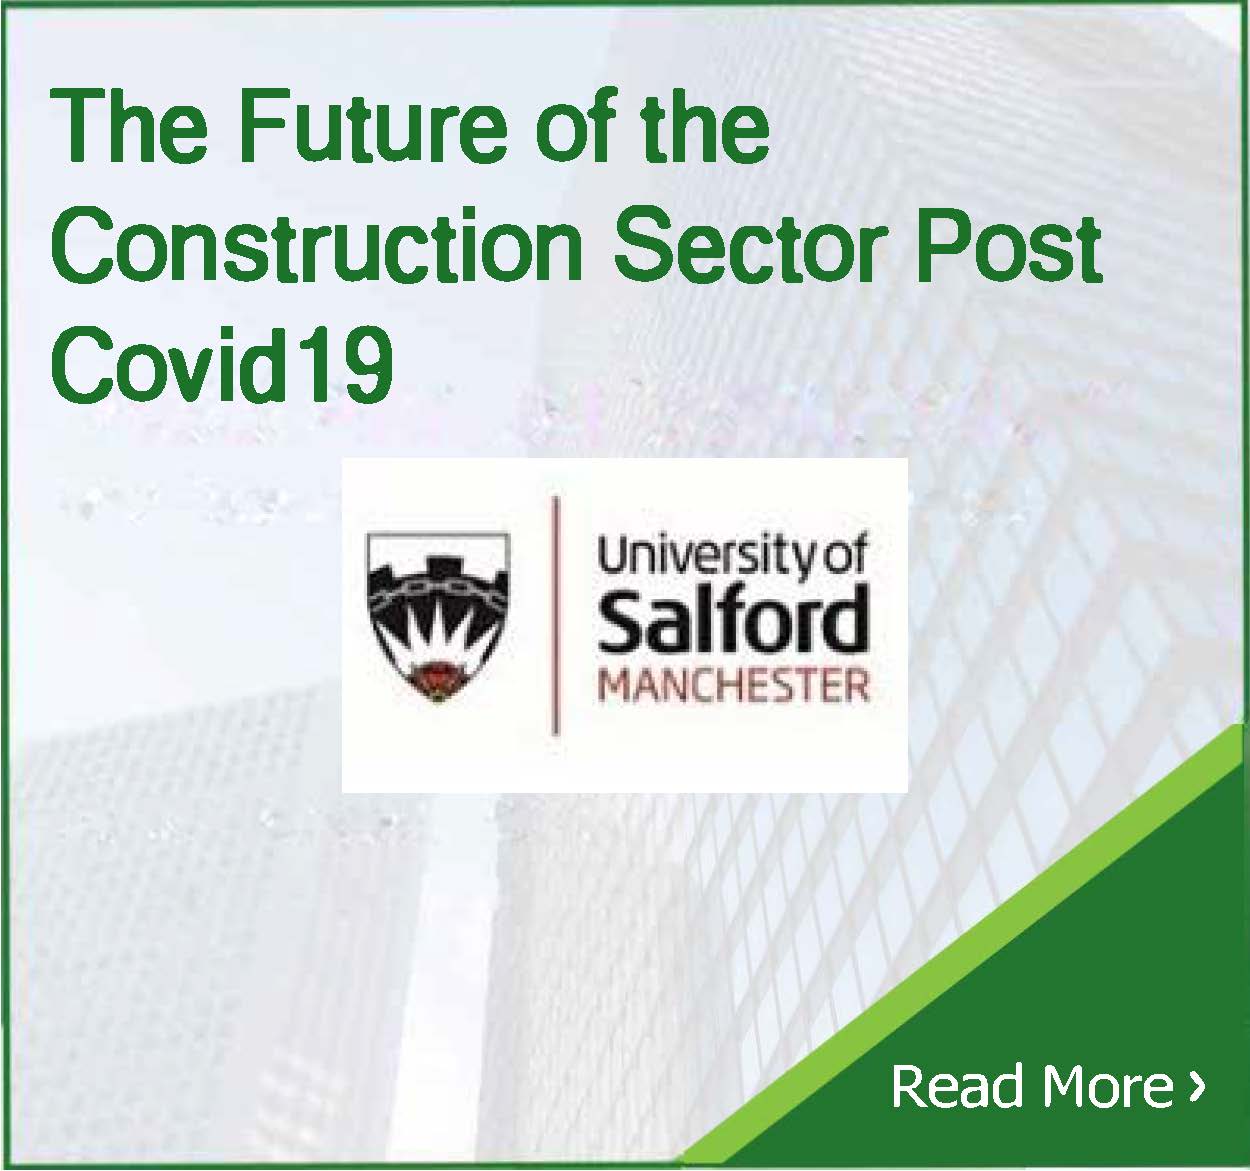 THE FUTURE OF THE CONSTRUCTION SECTOR POST COVID-19